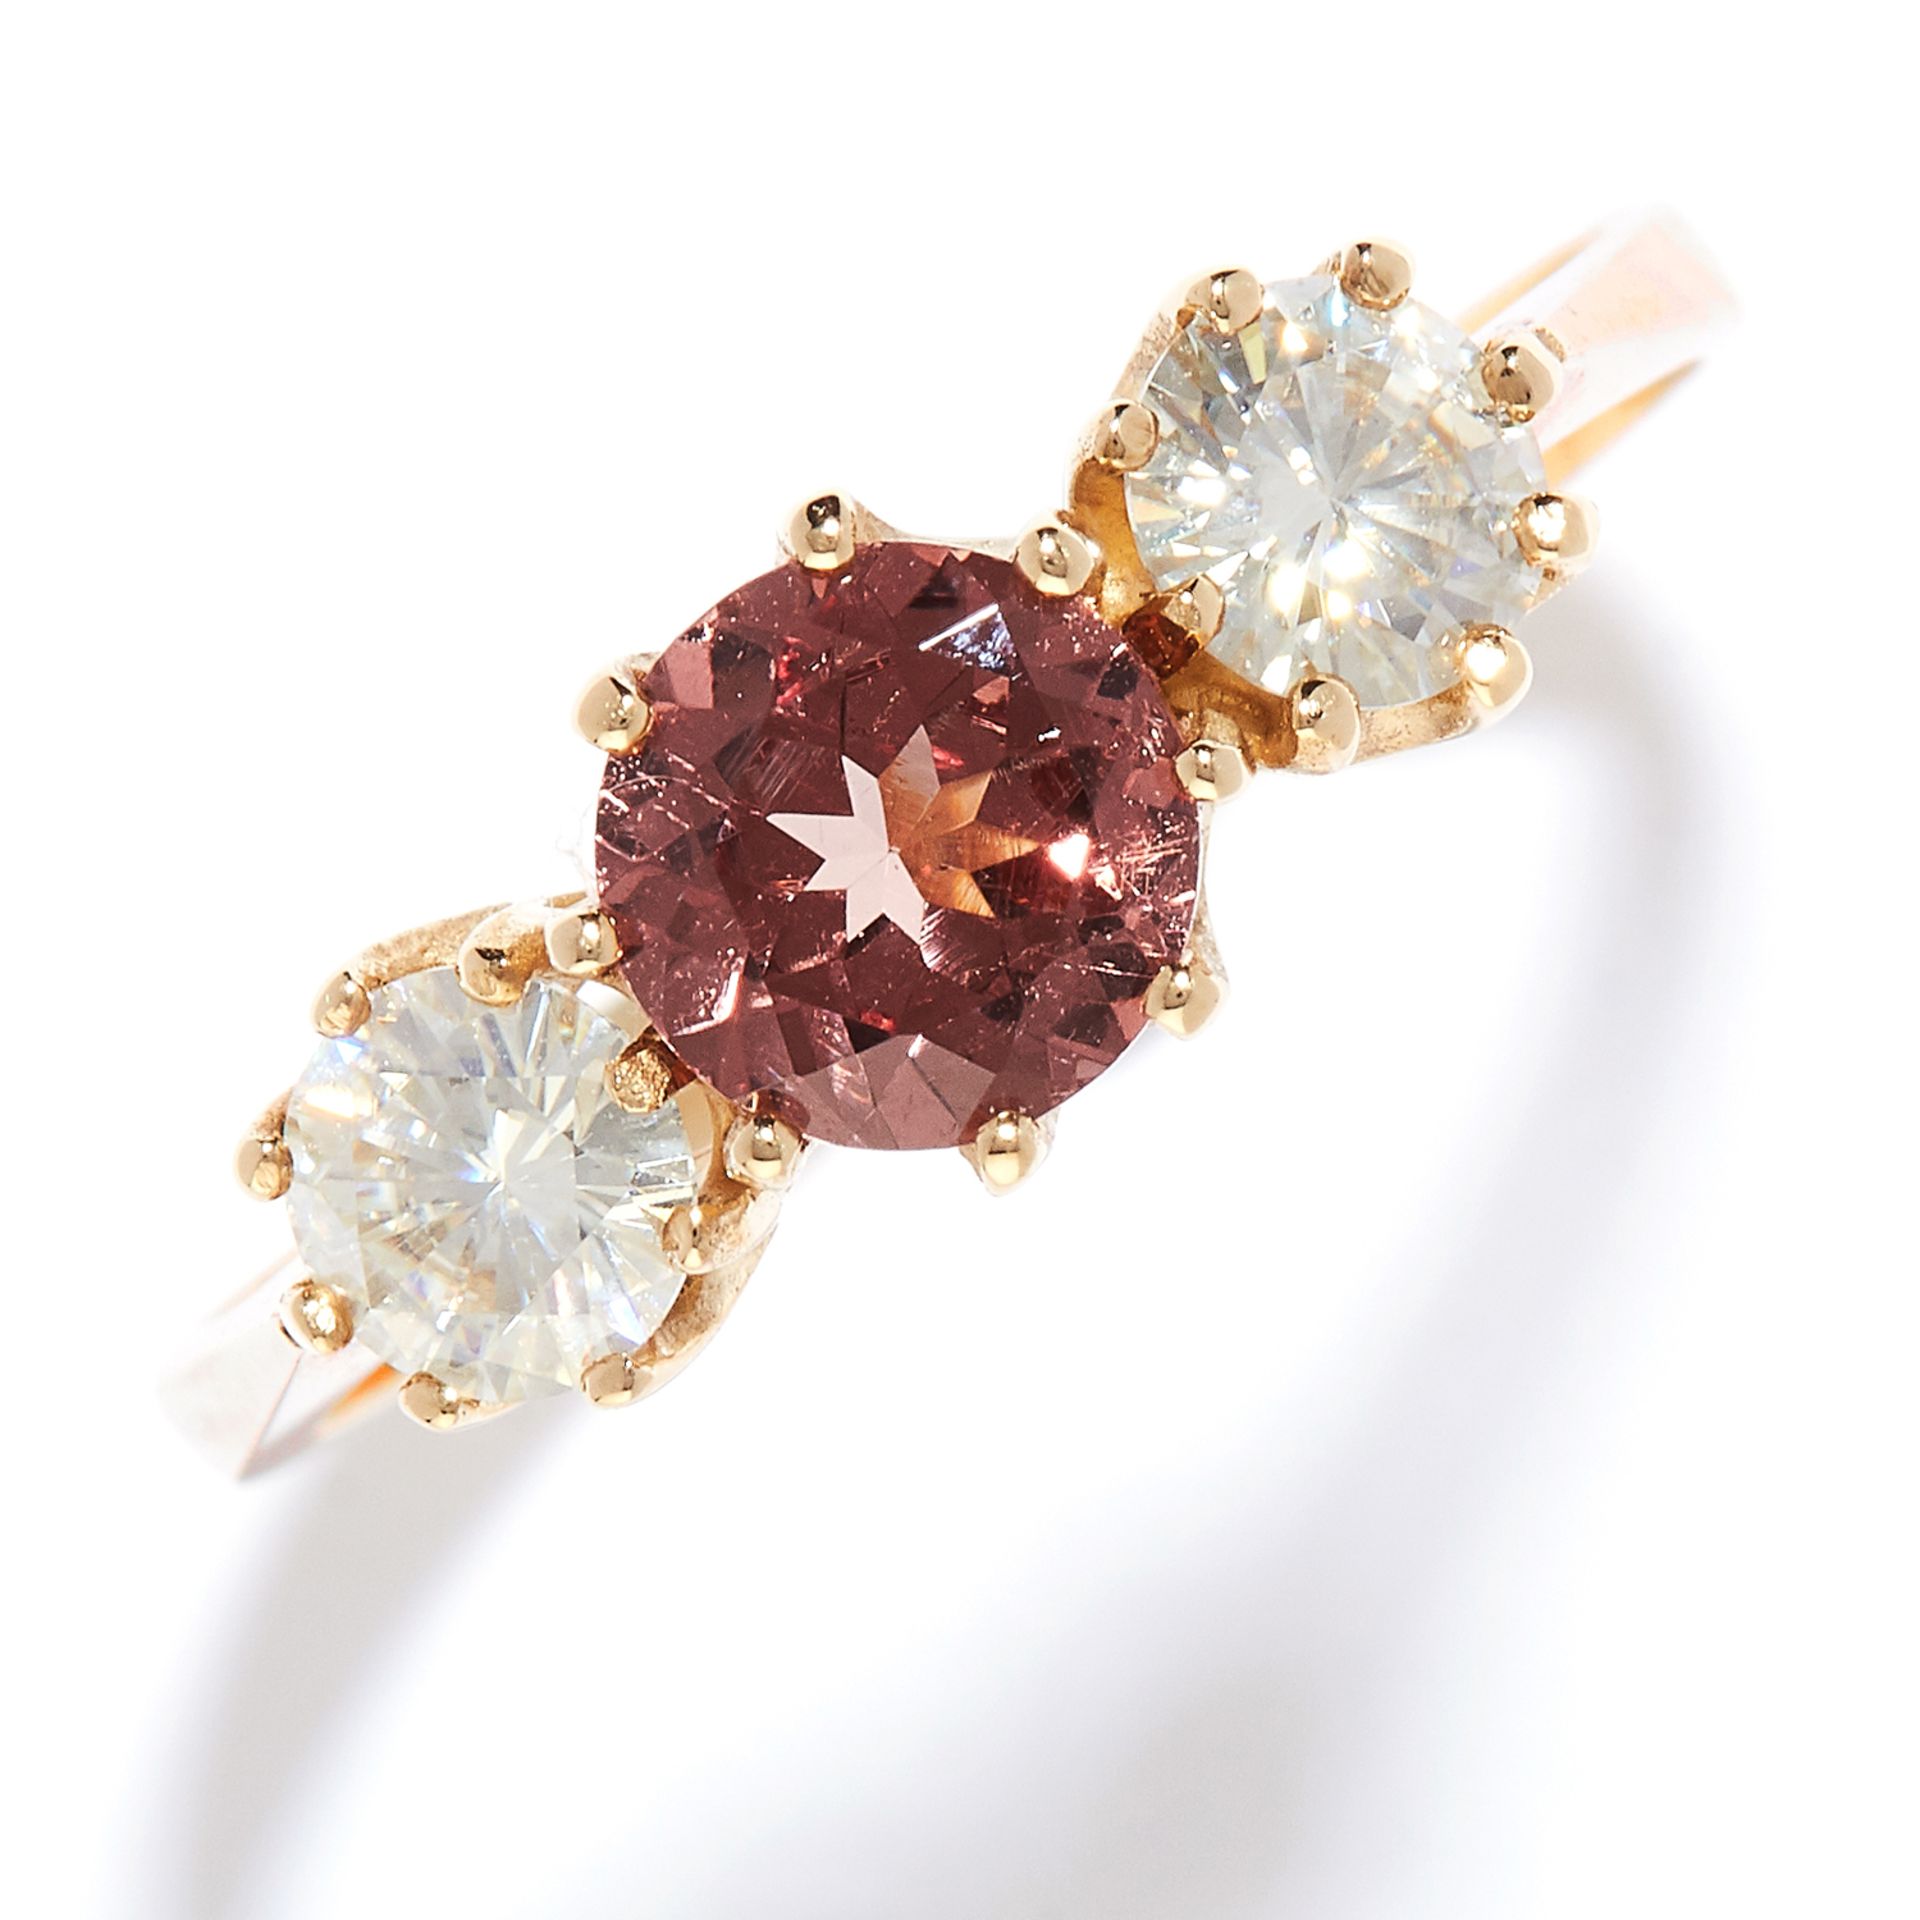 GARNET AND MOISSANITE THREE STONE RING in yellow gold, the round cut pink garnet of 1.0 carats